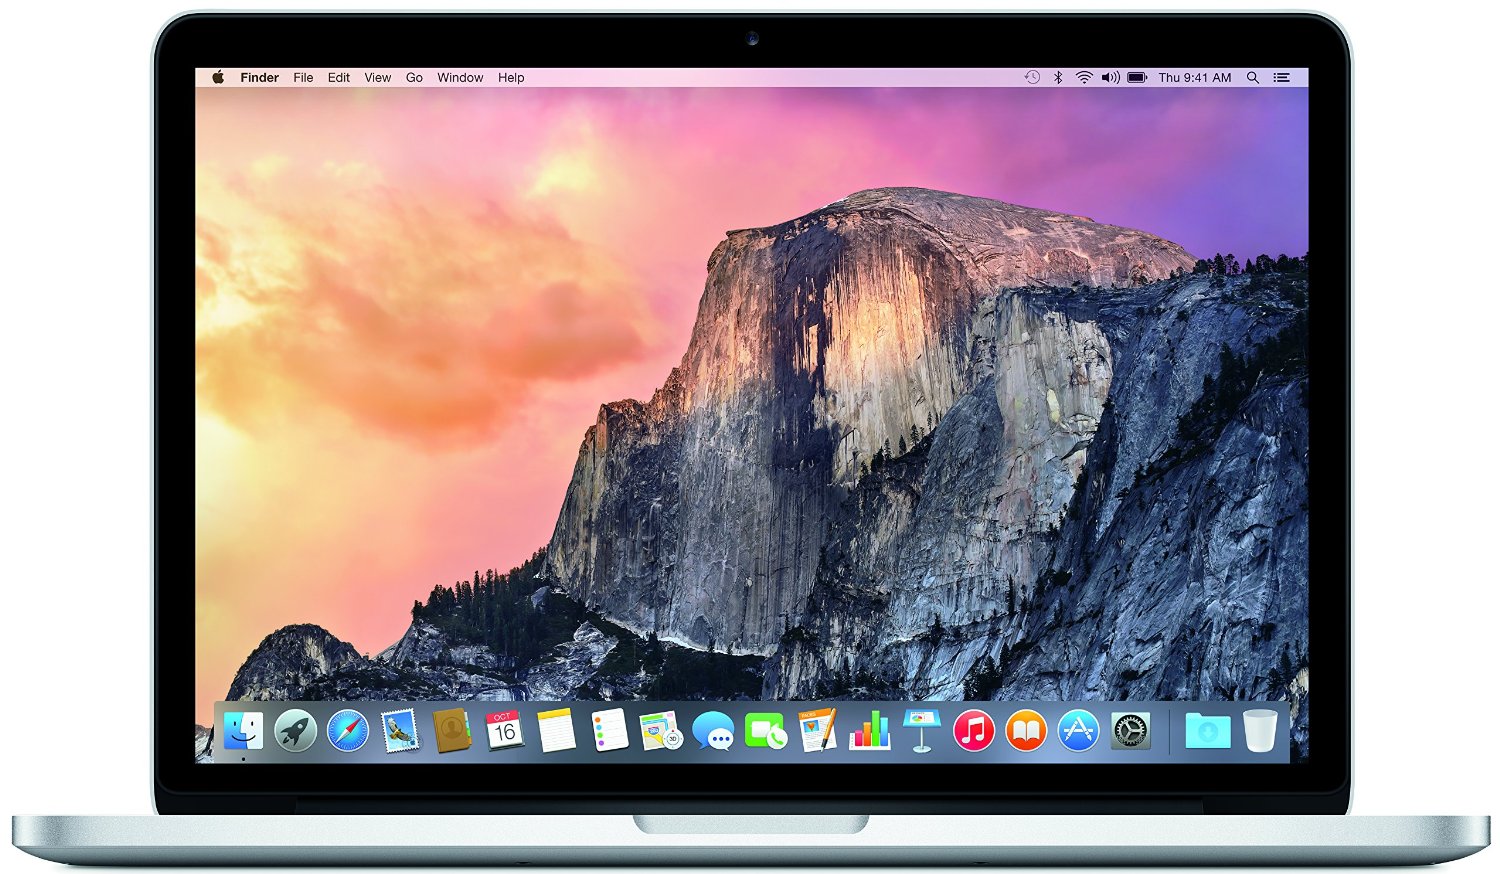 Apple Macbook Pro 13.3 Inch Laptop with Retina Display - Overall Best Laptop for College Students 2015